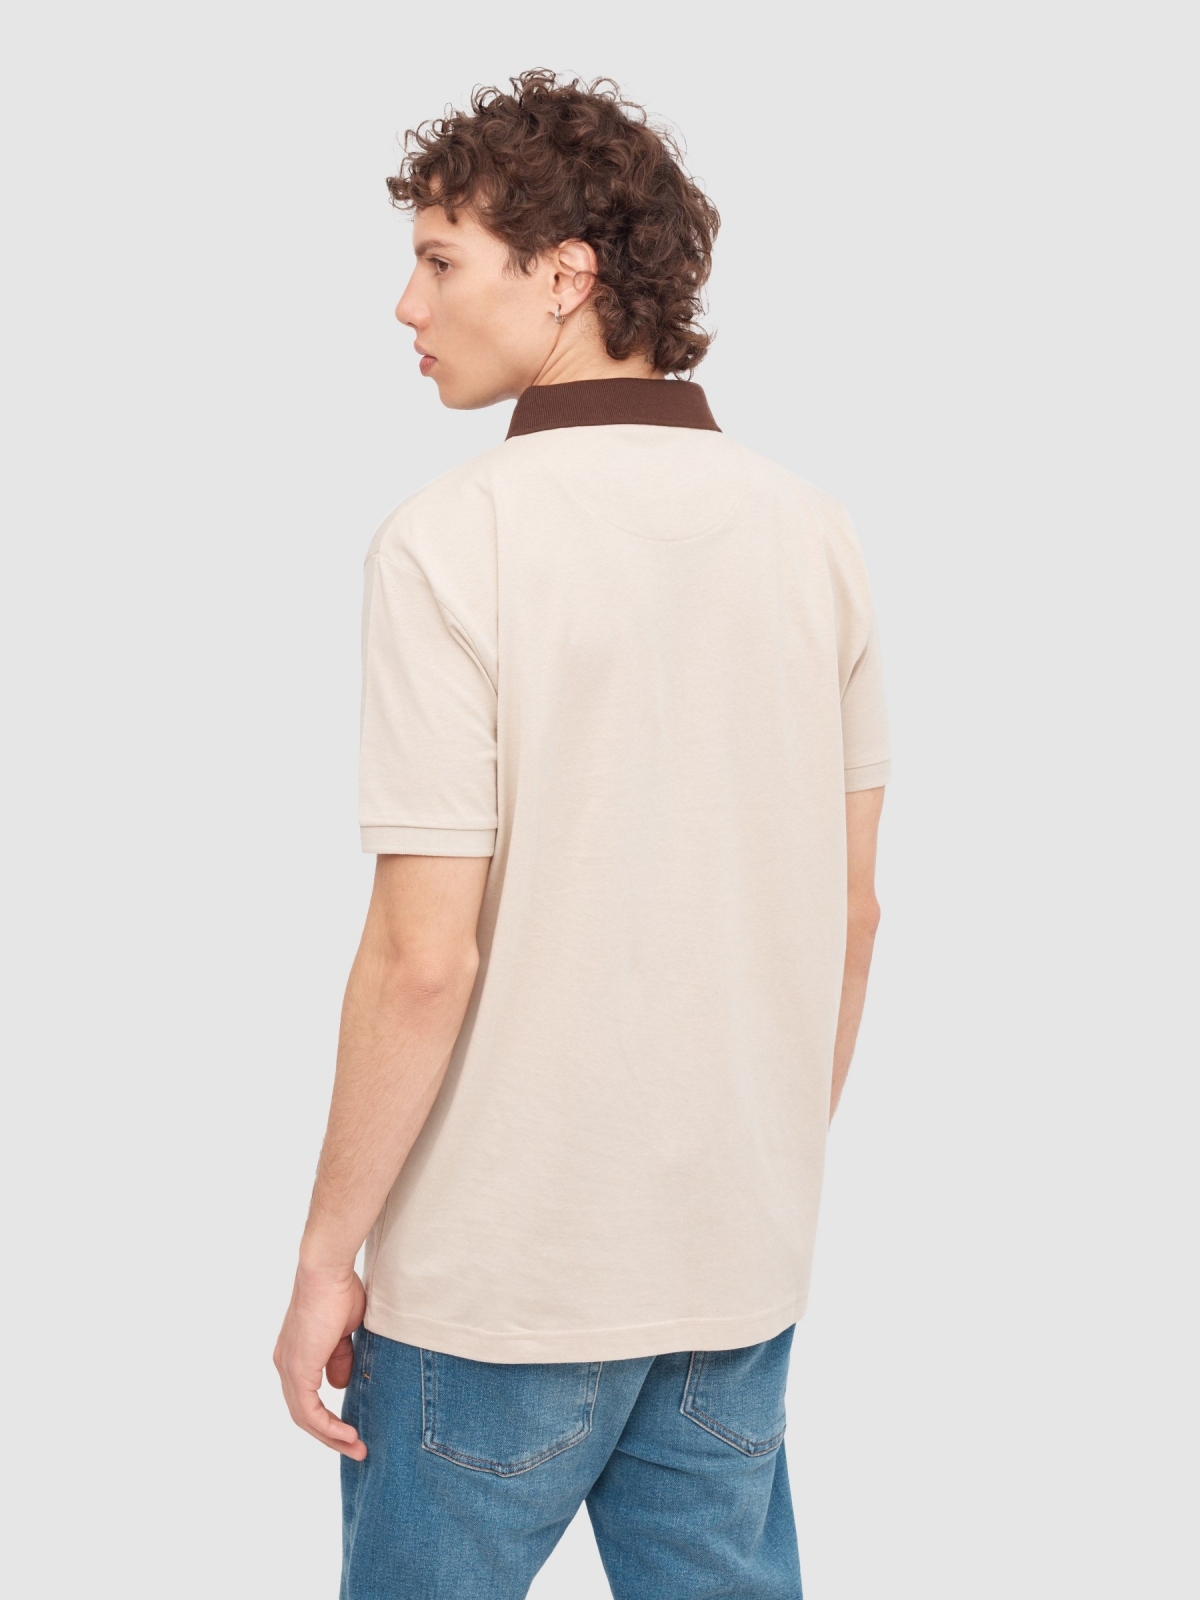 Colour block polo shirt taupe middle back view